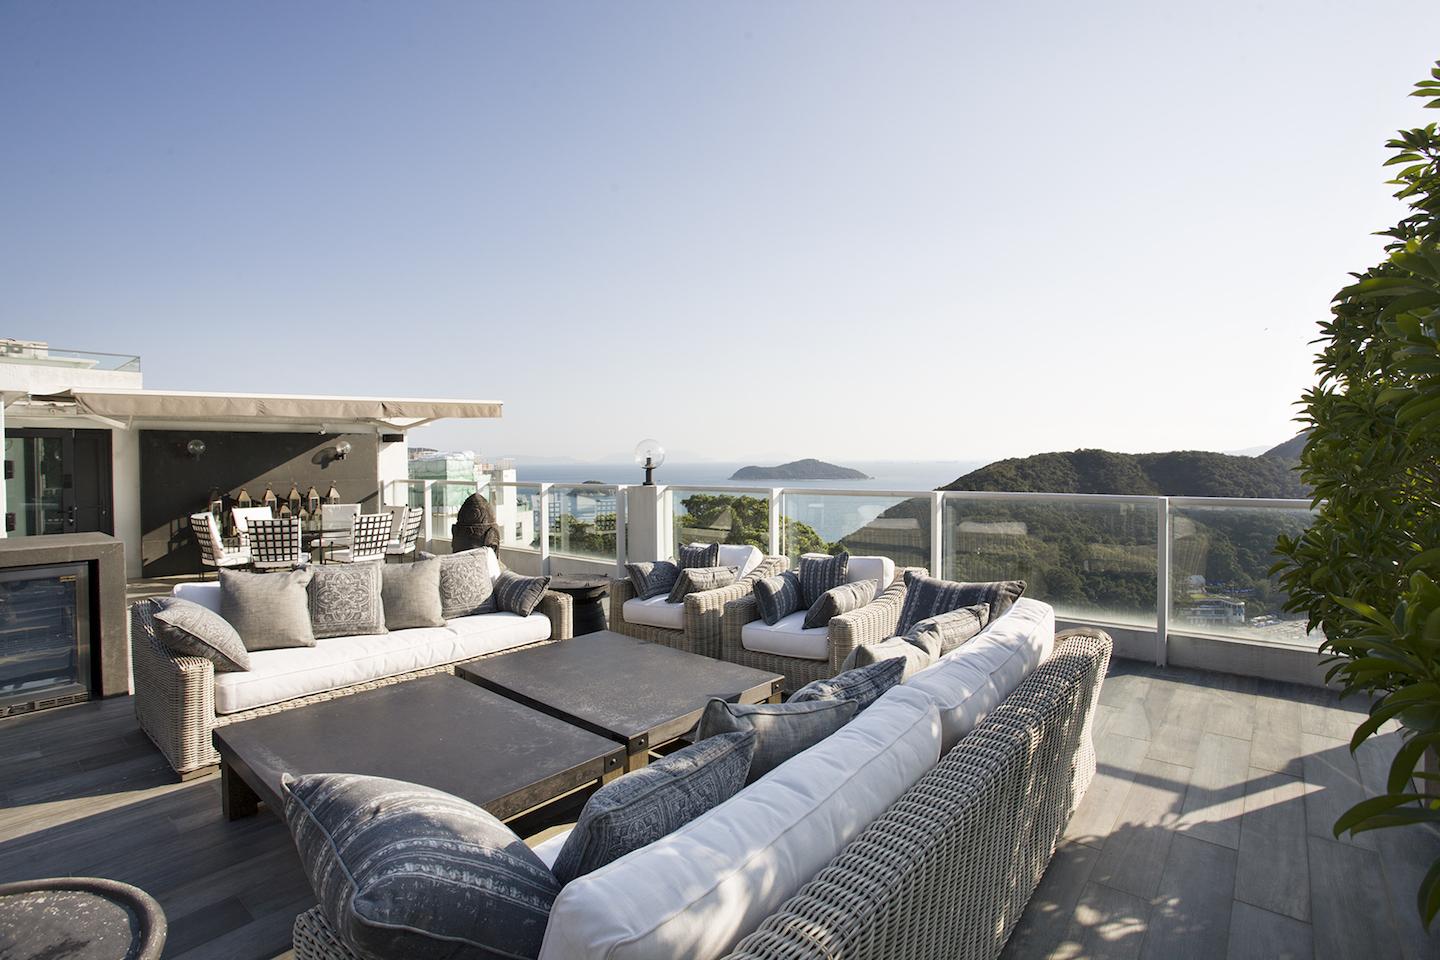 Different lounge areas make the terrace a comfortable spot for entertaining